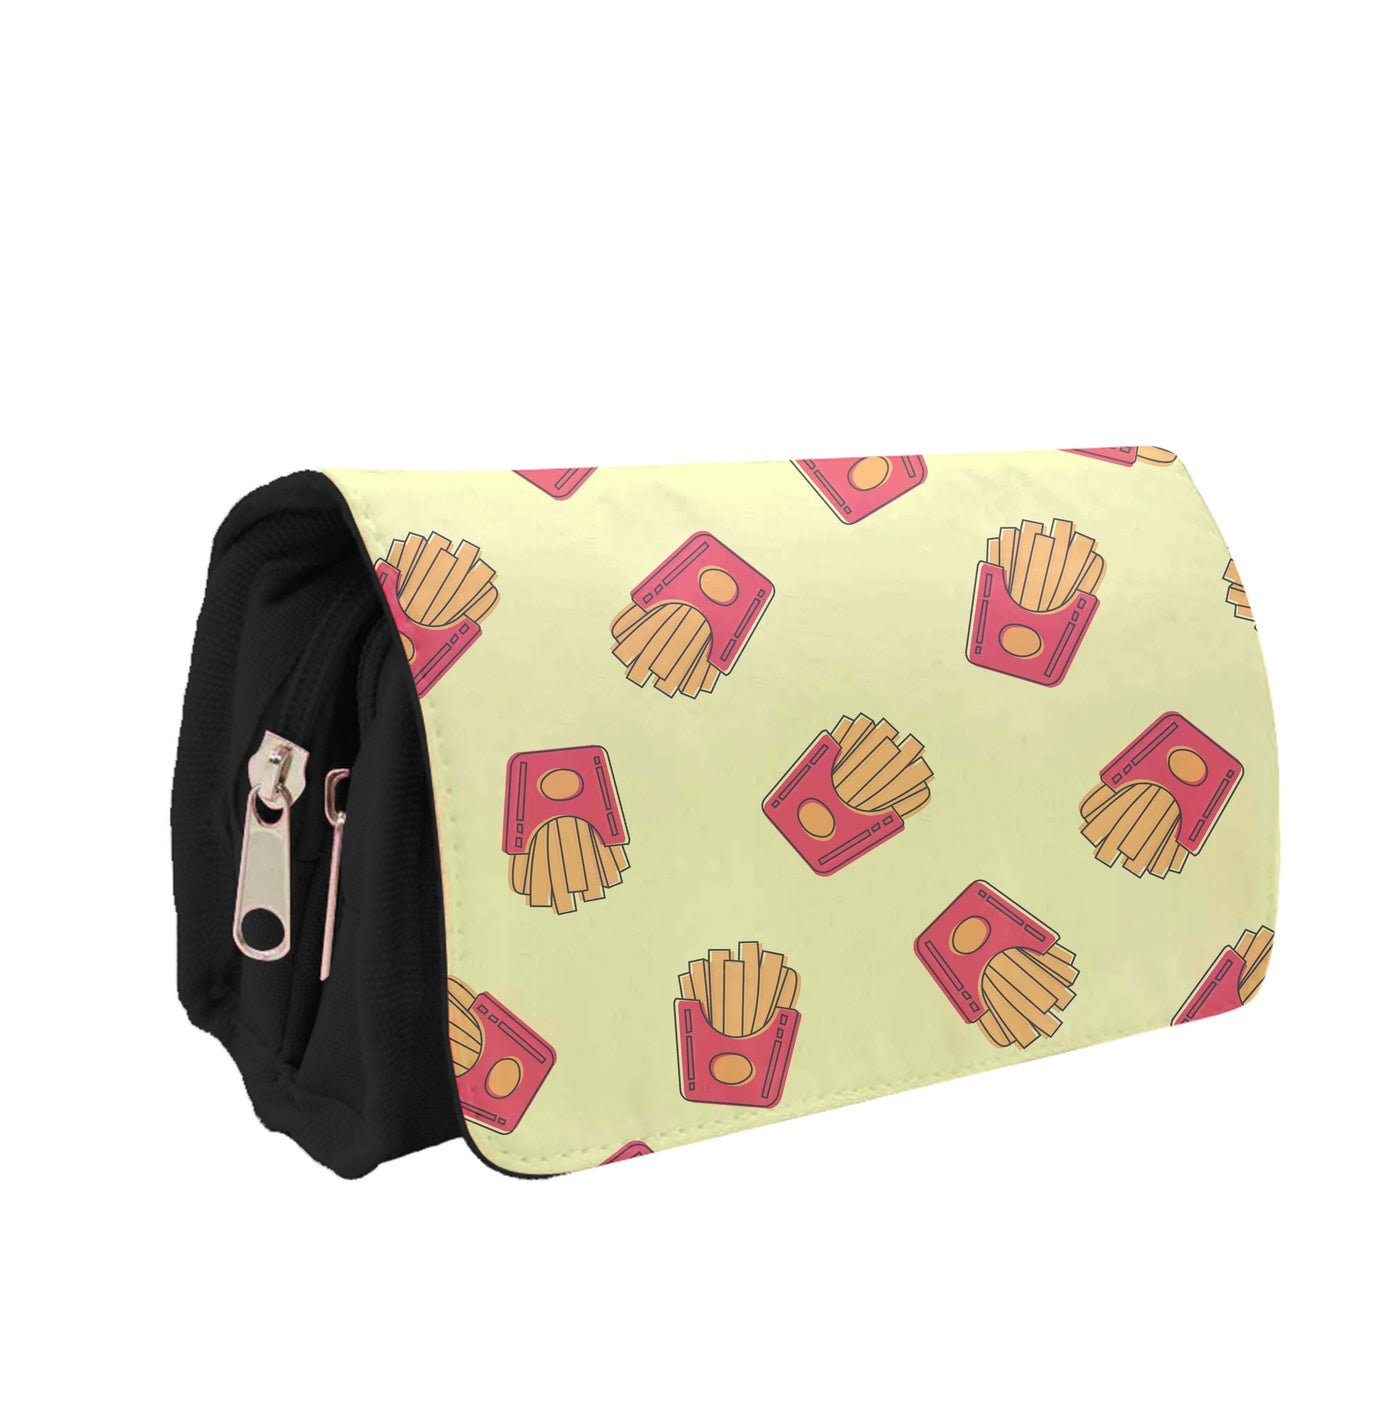 Fries - Fast Food Patterns Pencil Case